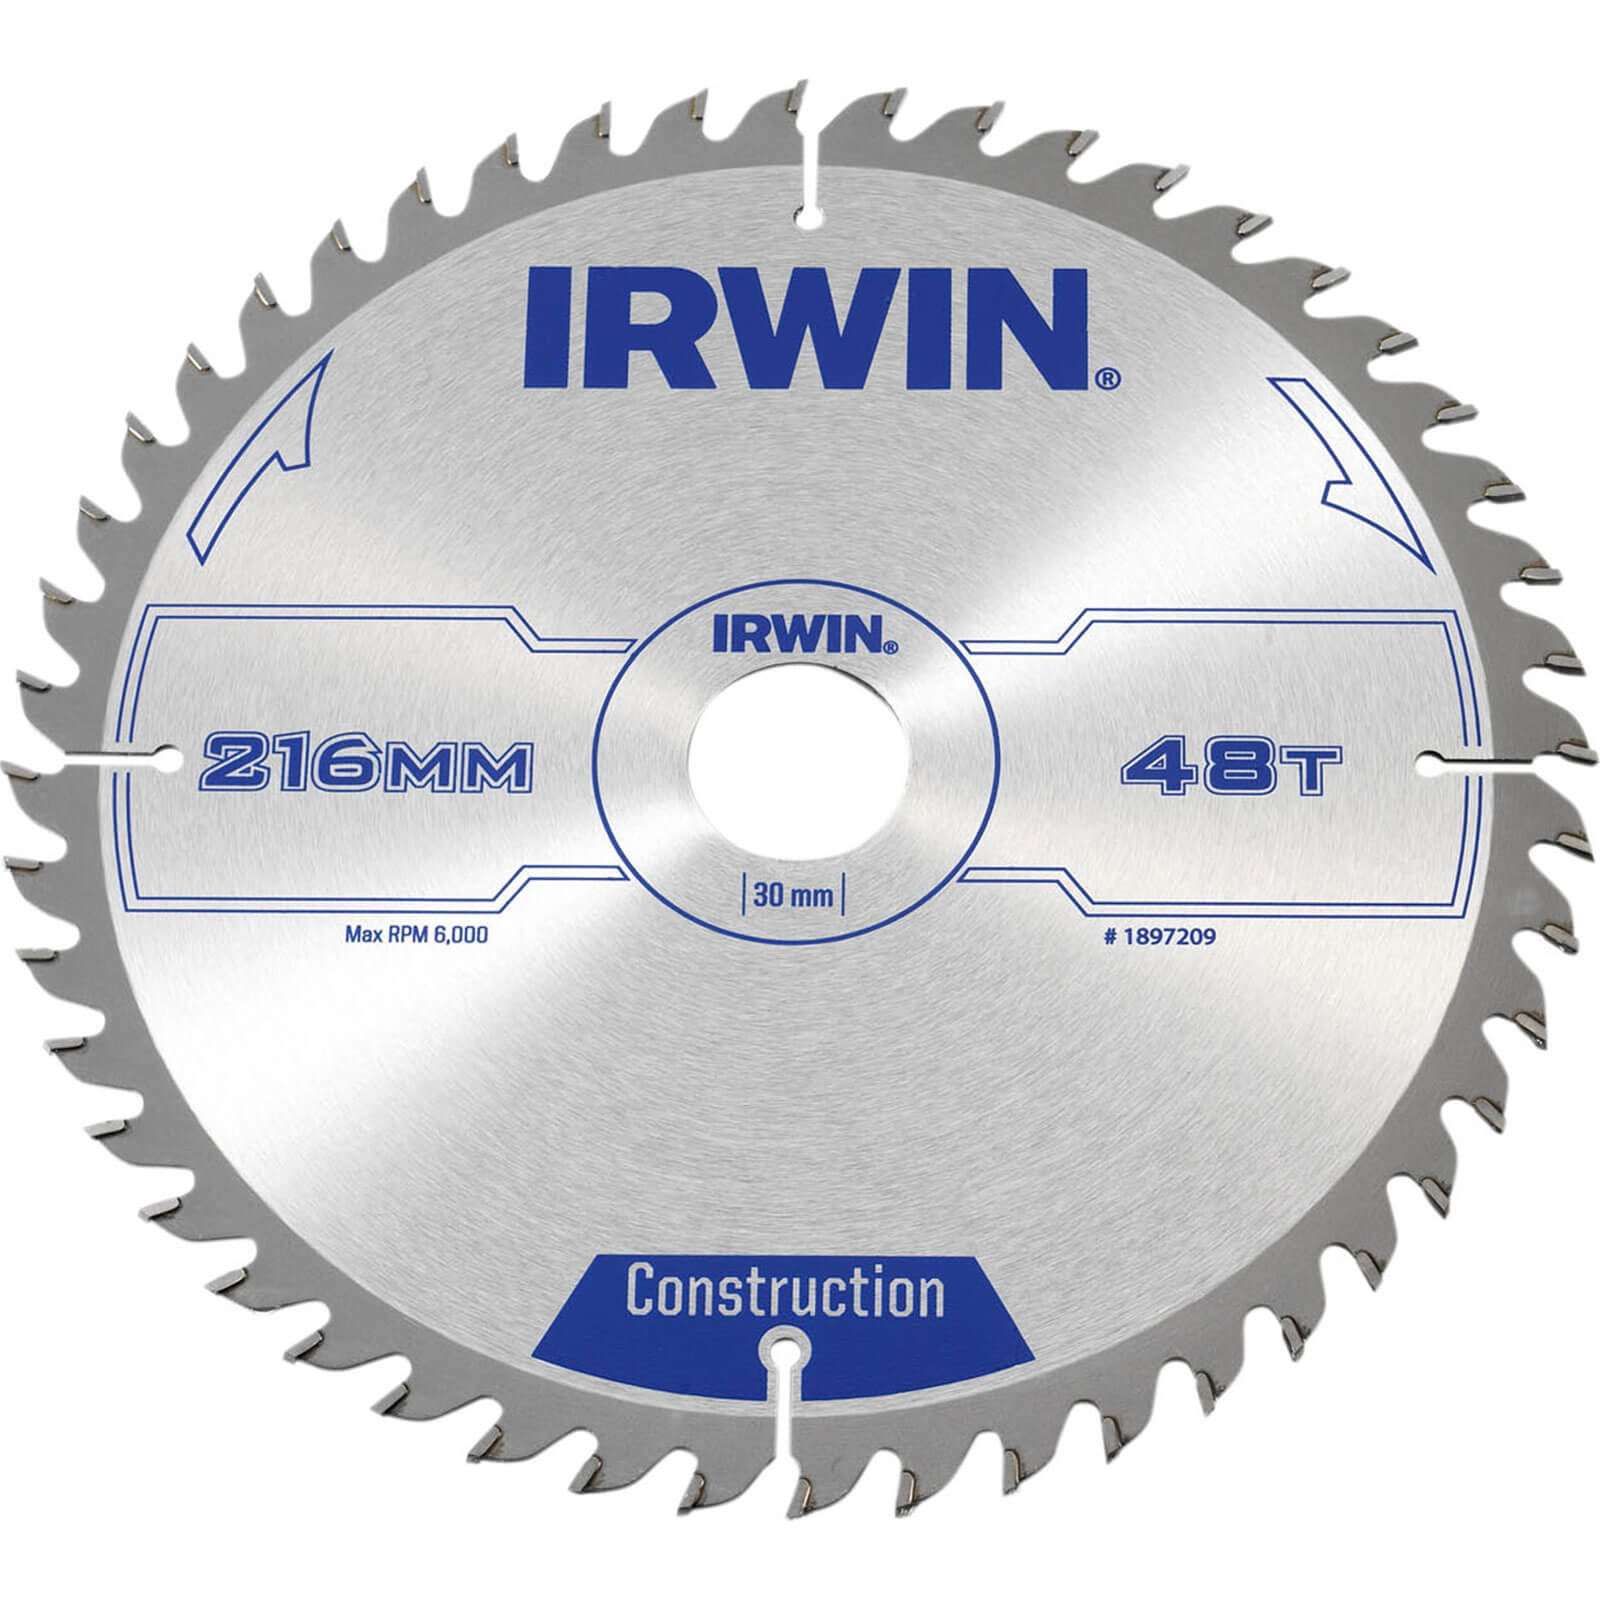 Image of Irwin ATB Construction Circular Saw Blade 216mm 48T 30mm